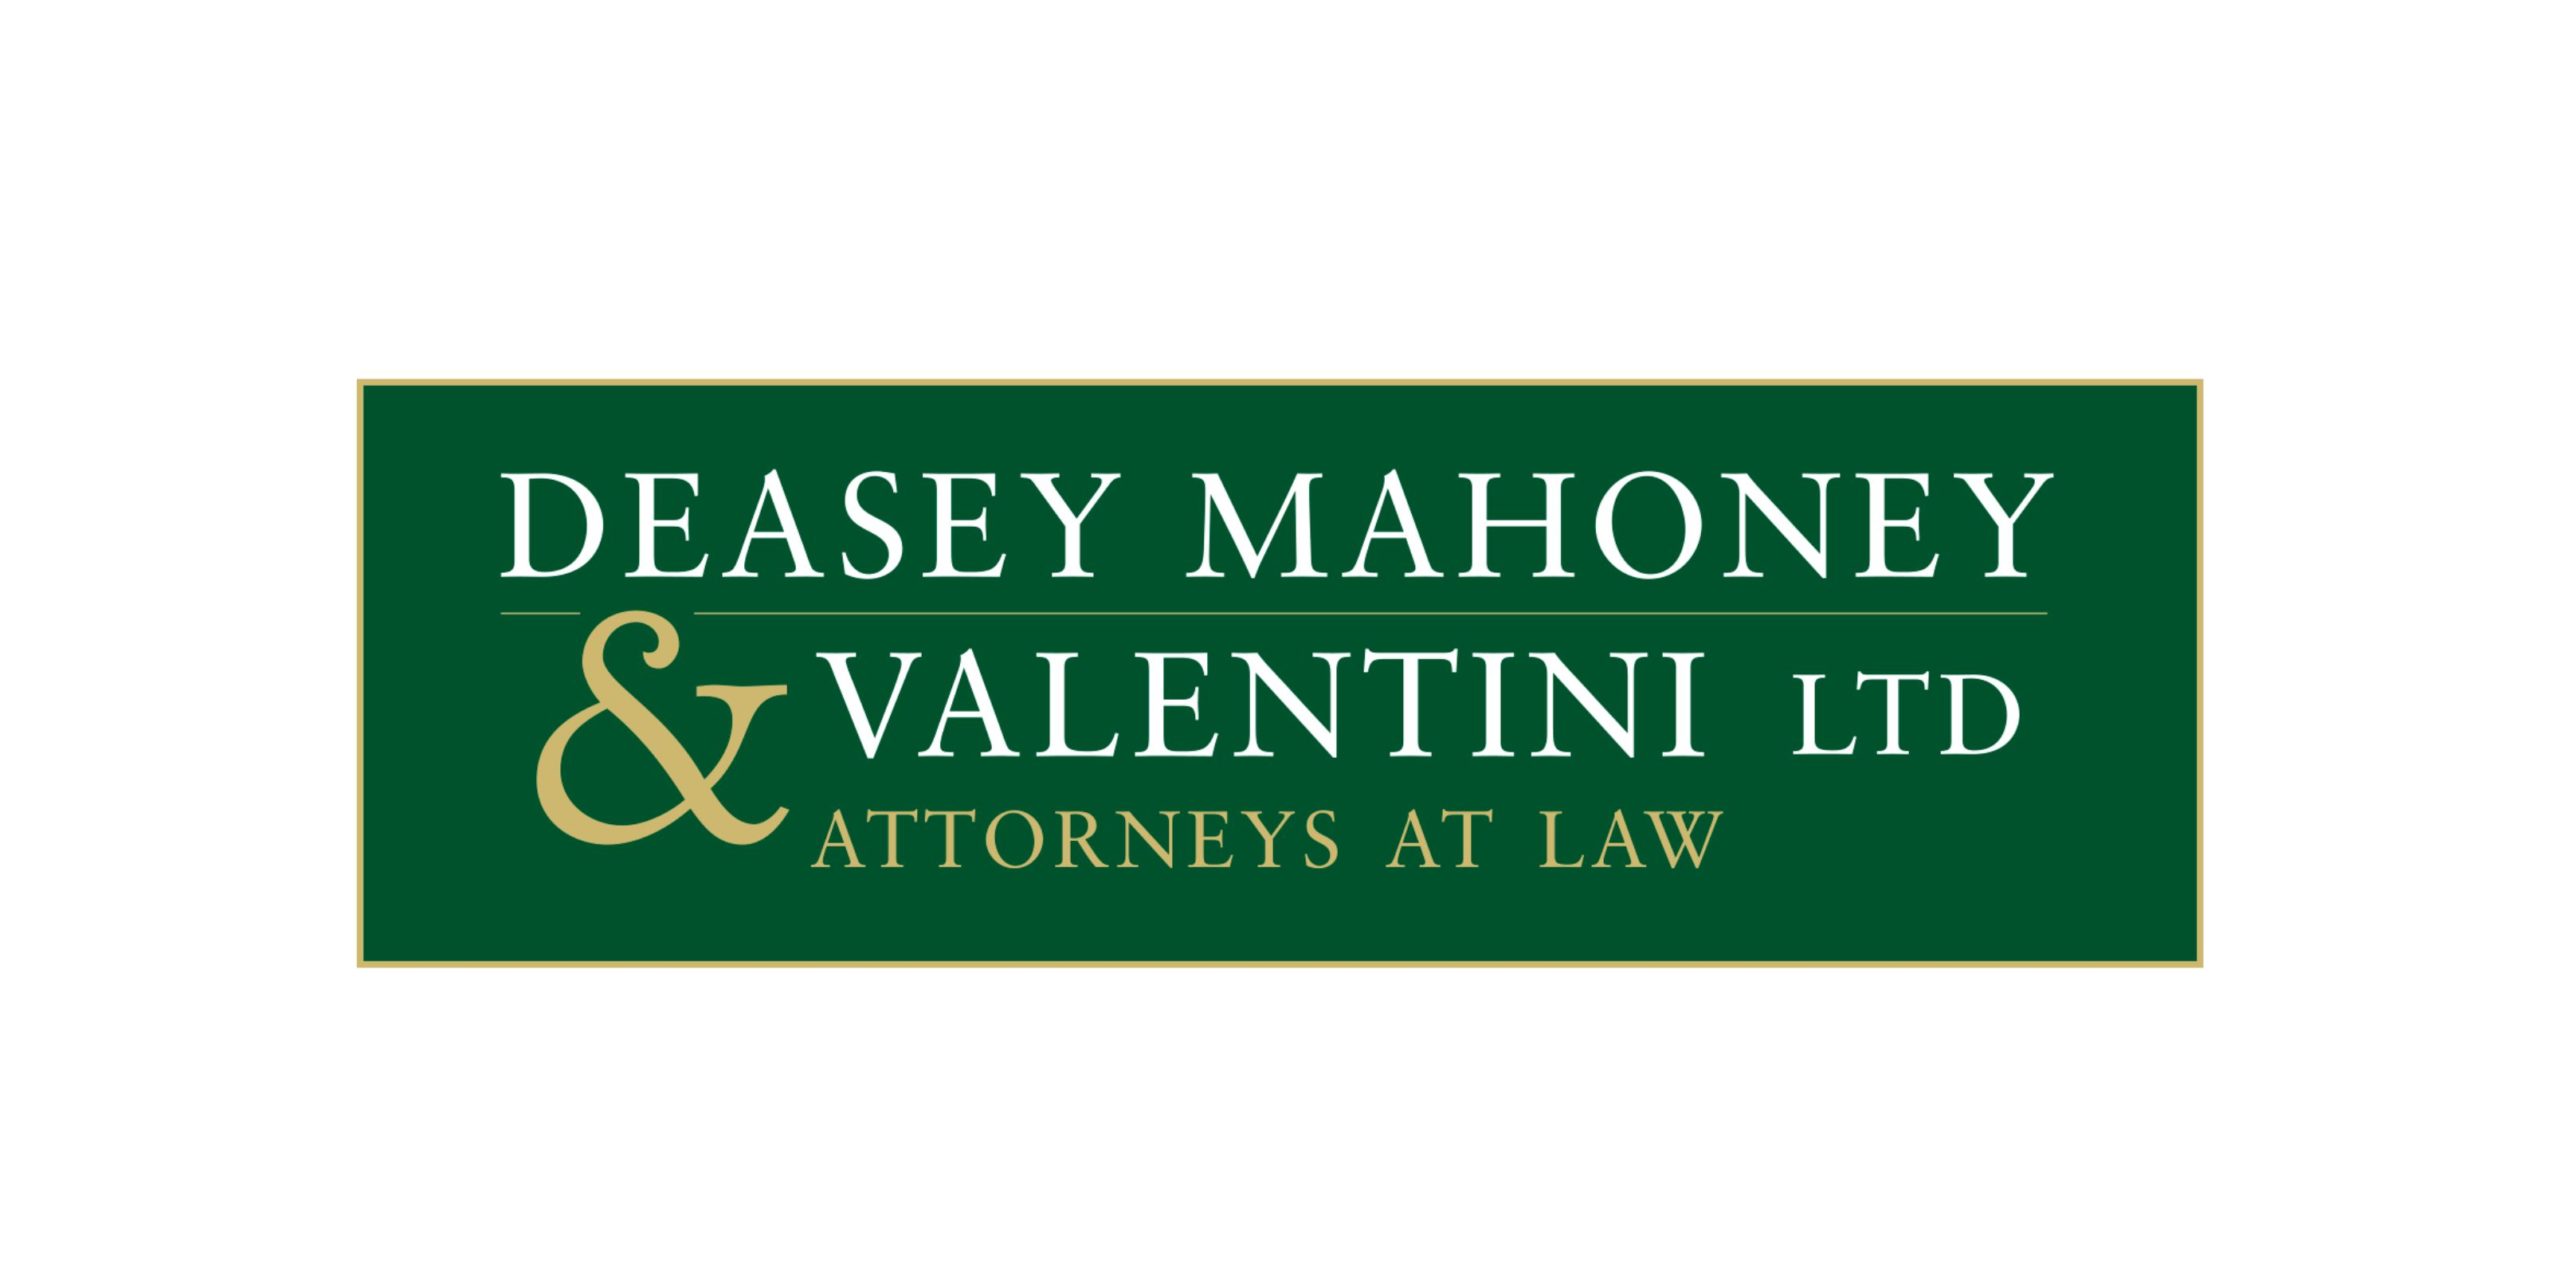 Deasey, Mahoney & Valentini Law Firm Win in the Cloud with ACP